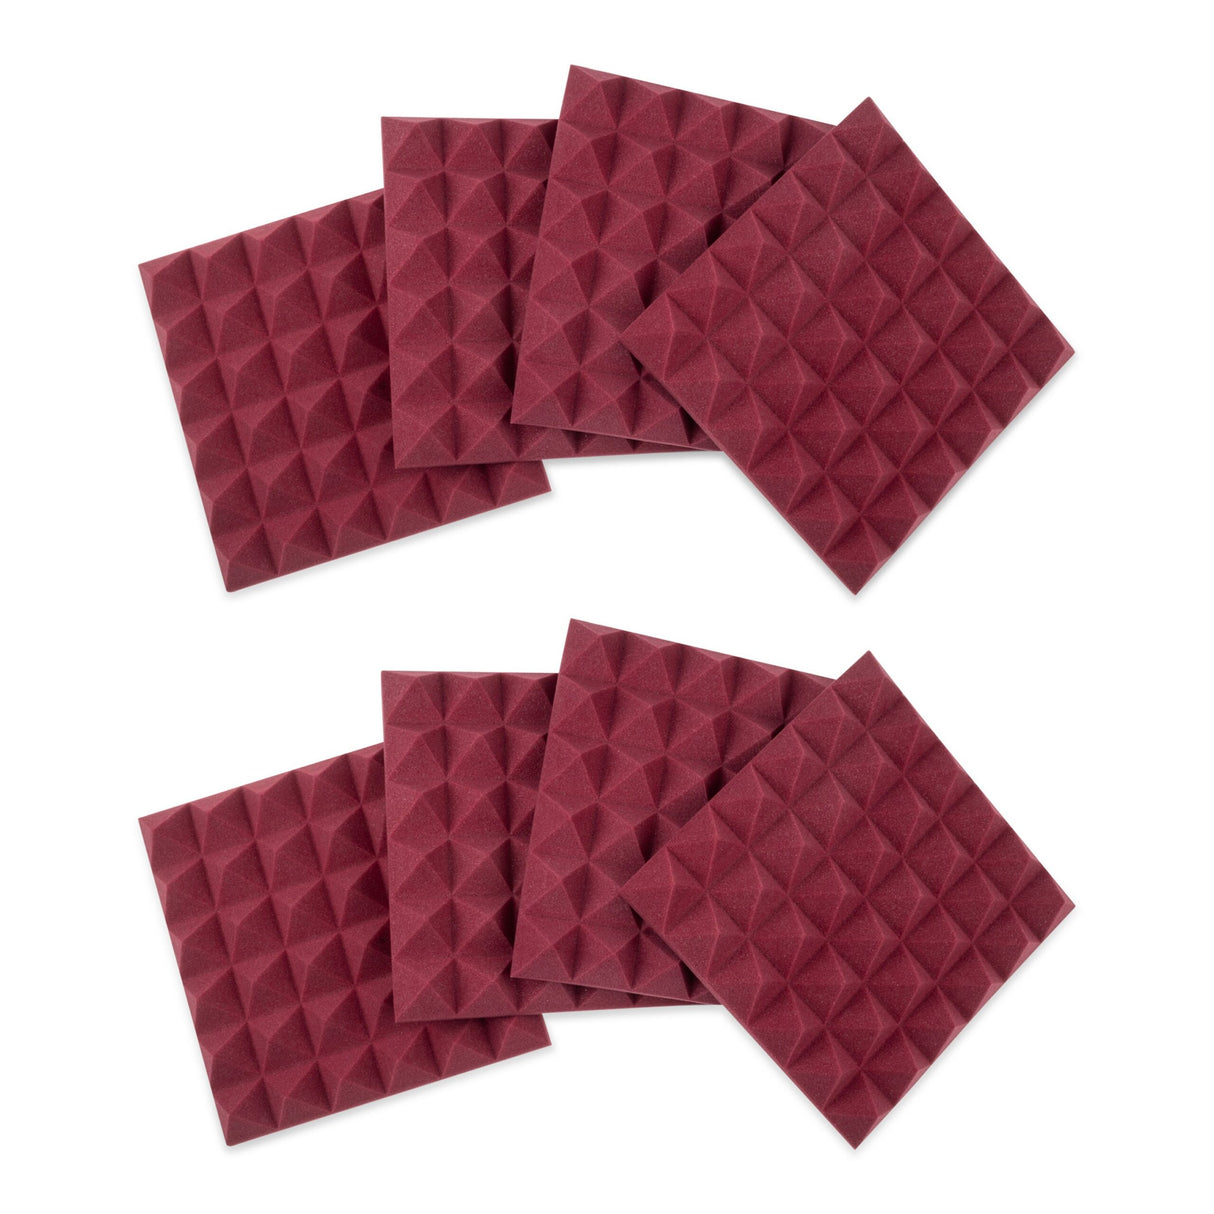 Gator GFW-ACPNL1212PBDY-8PK 8 Pack of Burgundy Acoustic Pyramid Panel, 12 x 12 Inches